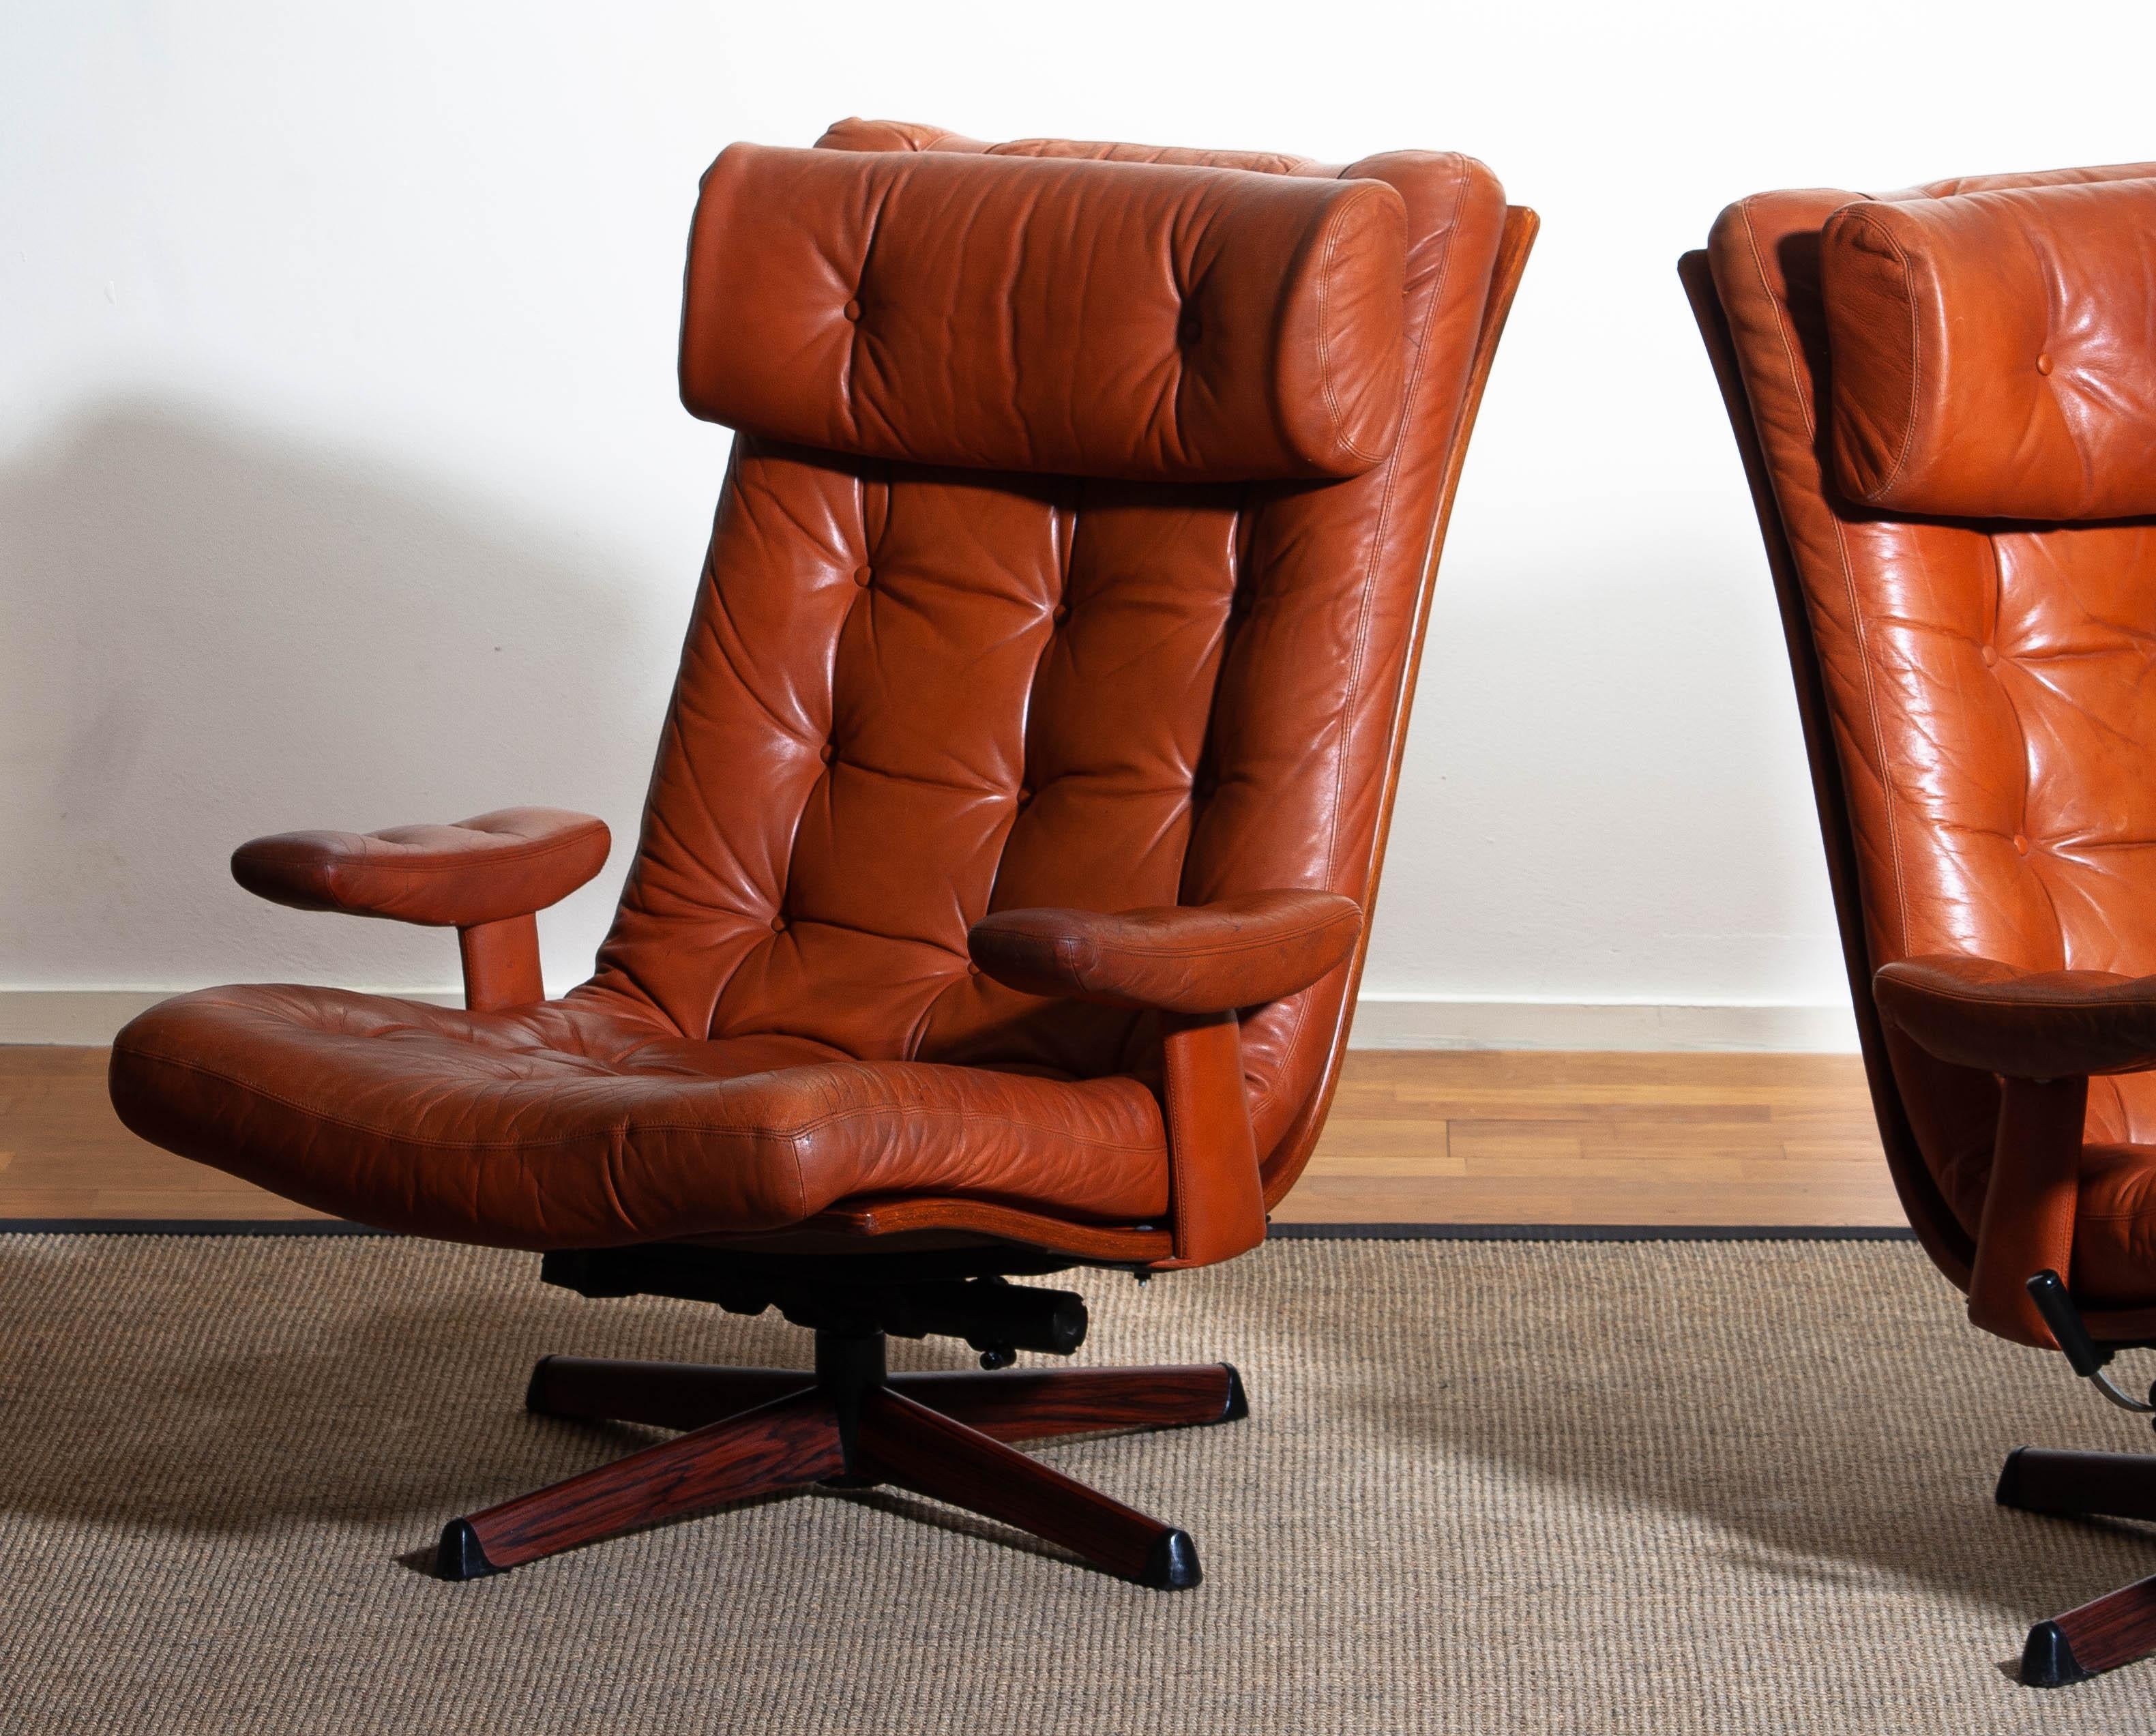 1960s Pair of Cognac Leather Swivel and Relax Lounge Chairs, Göte Design Nässjö 1